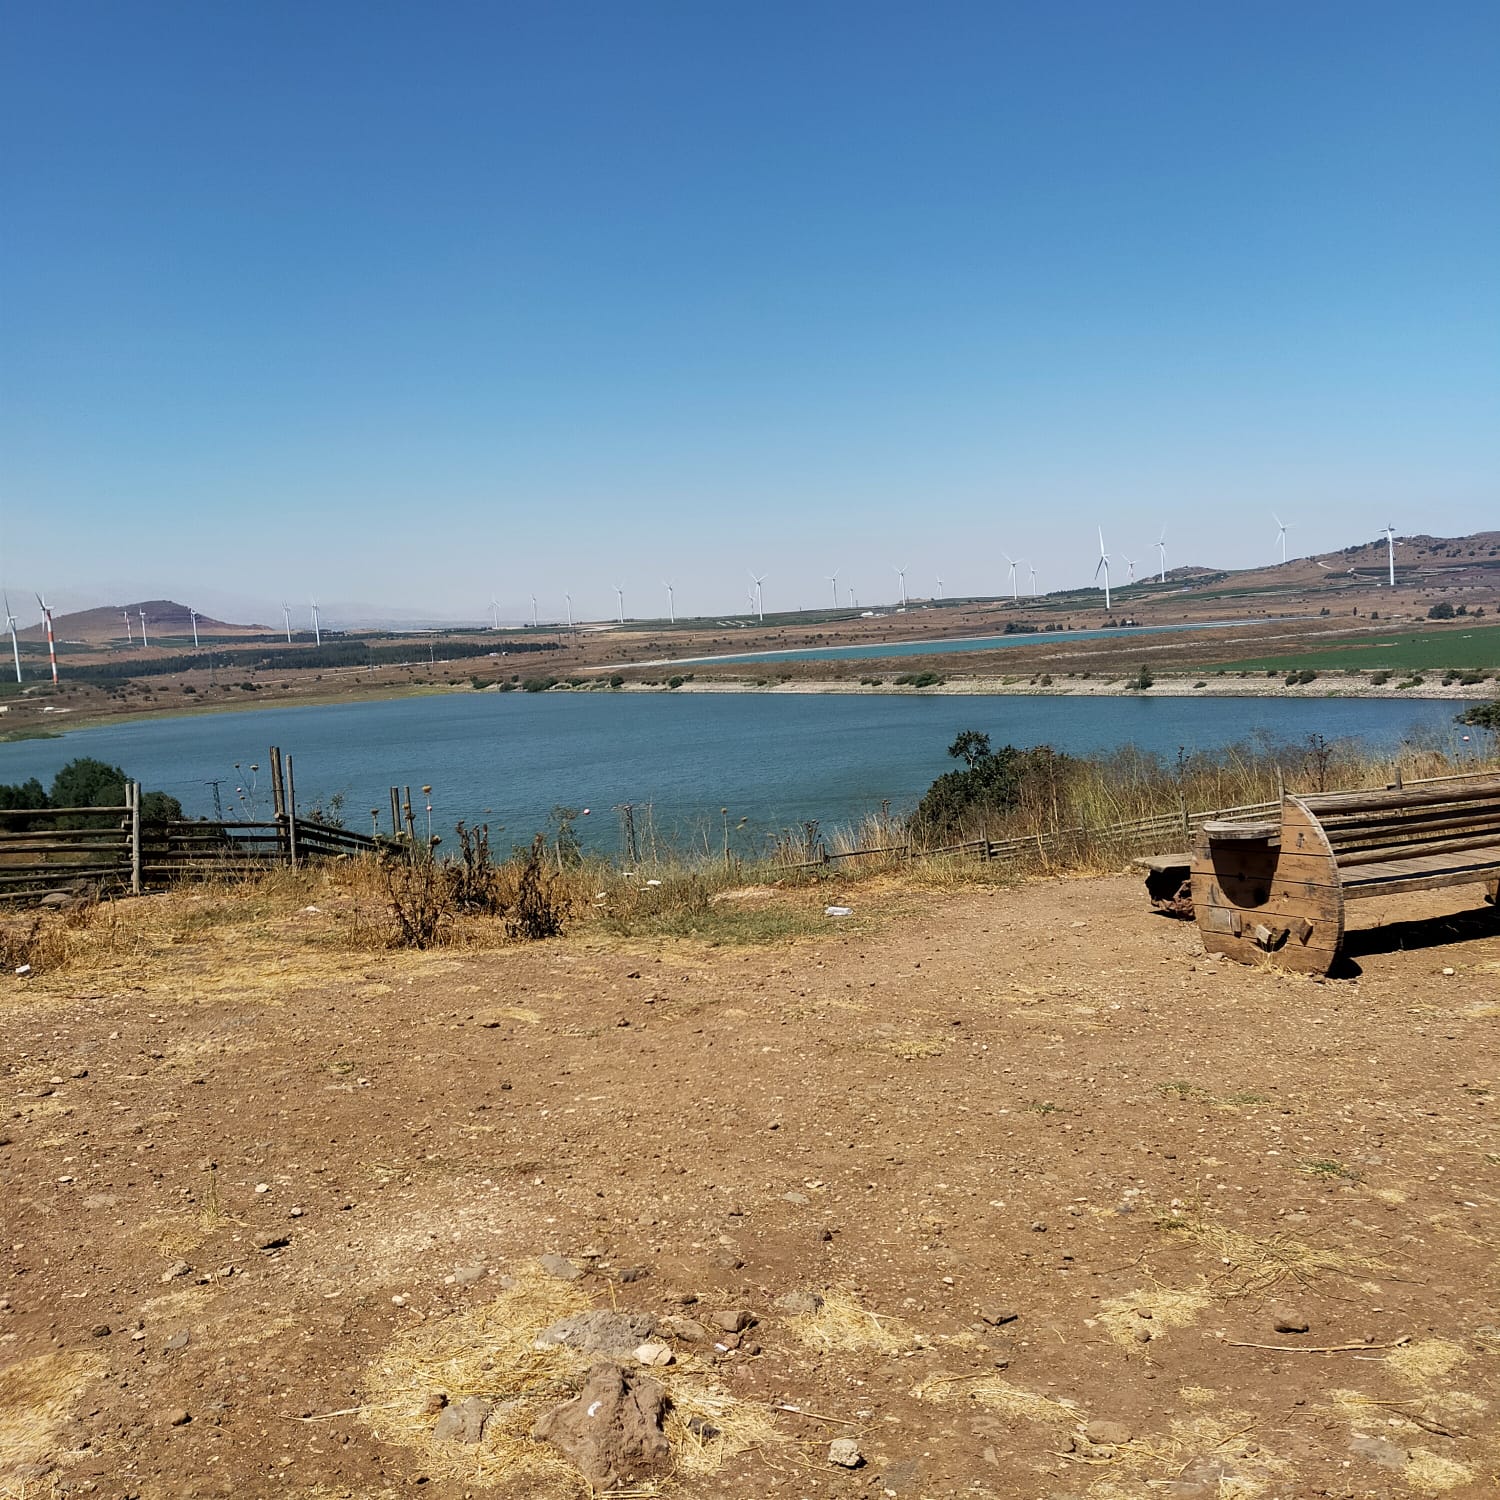 One of the dams in Israel showcasing water harvesting for farming